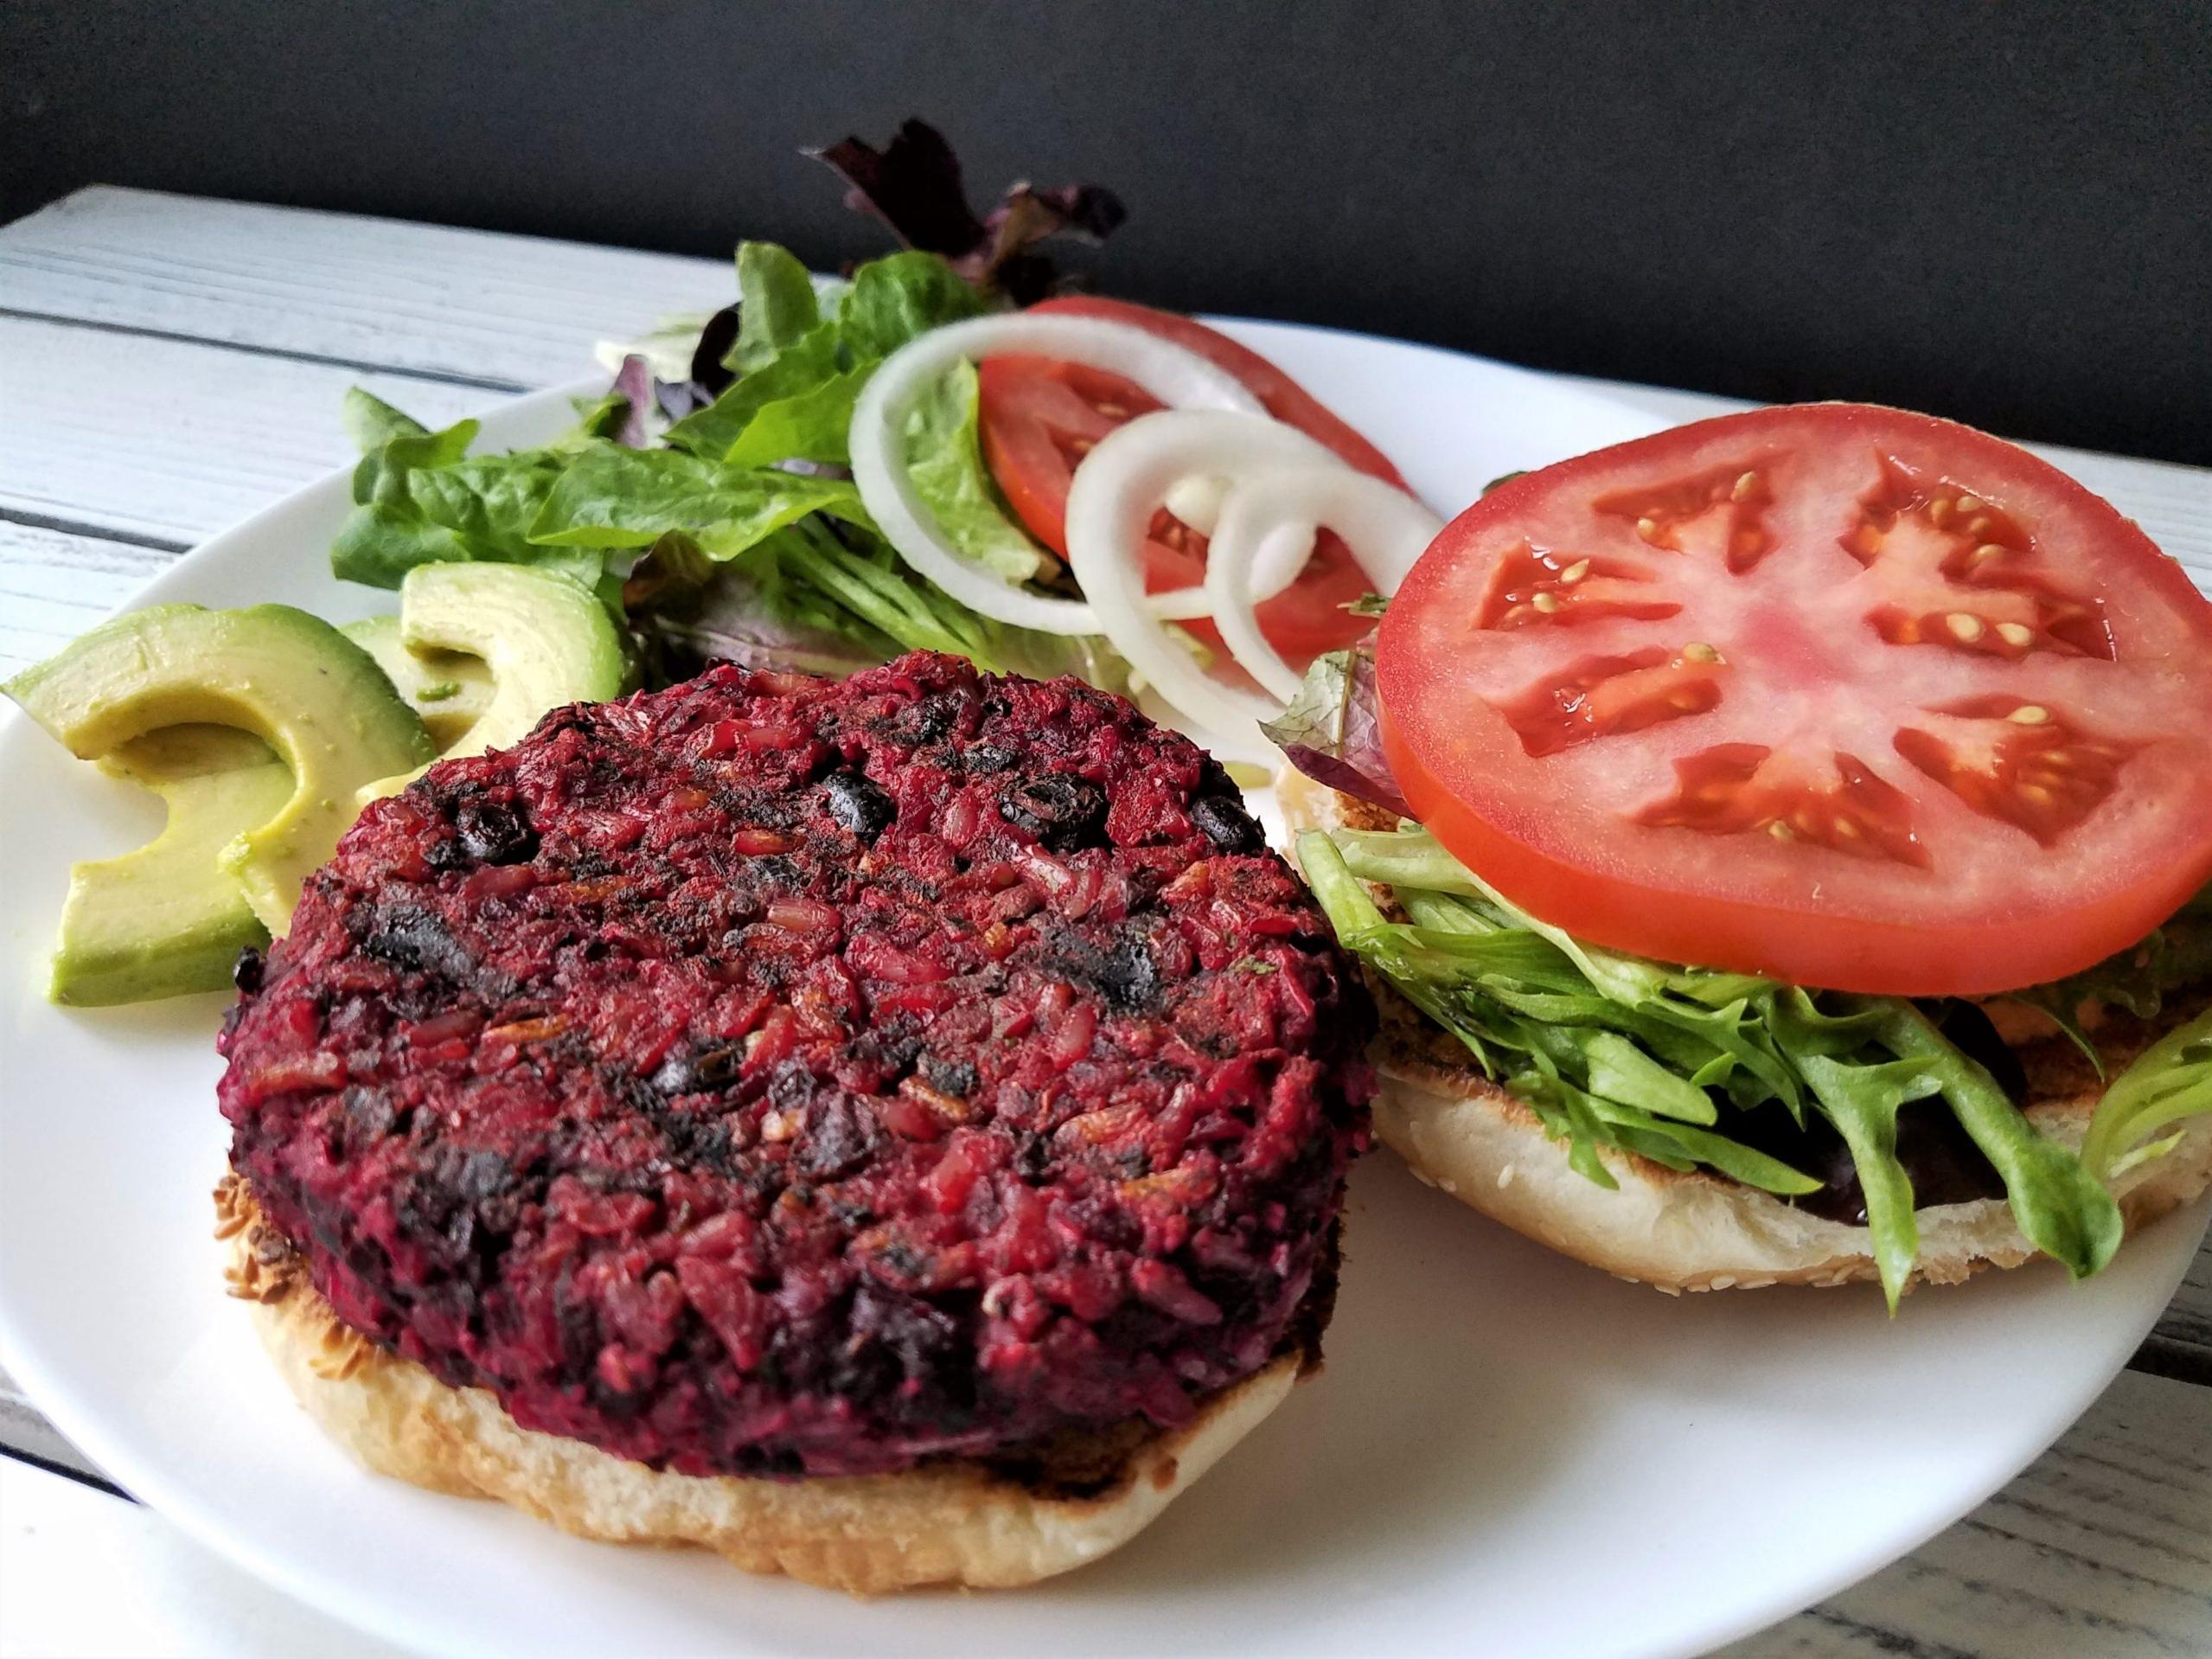  Looking for a tasty and healthy meal? Try the Northstar Cafe Veggie Burger!